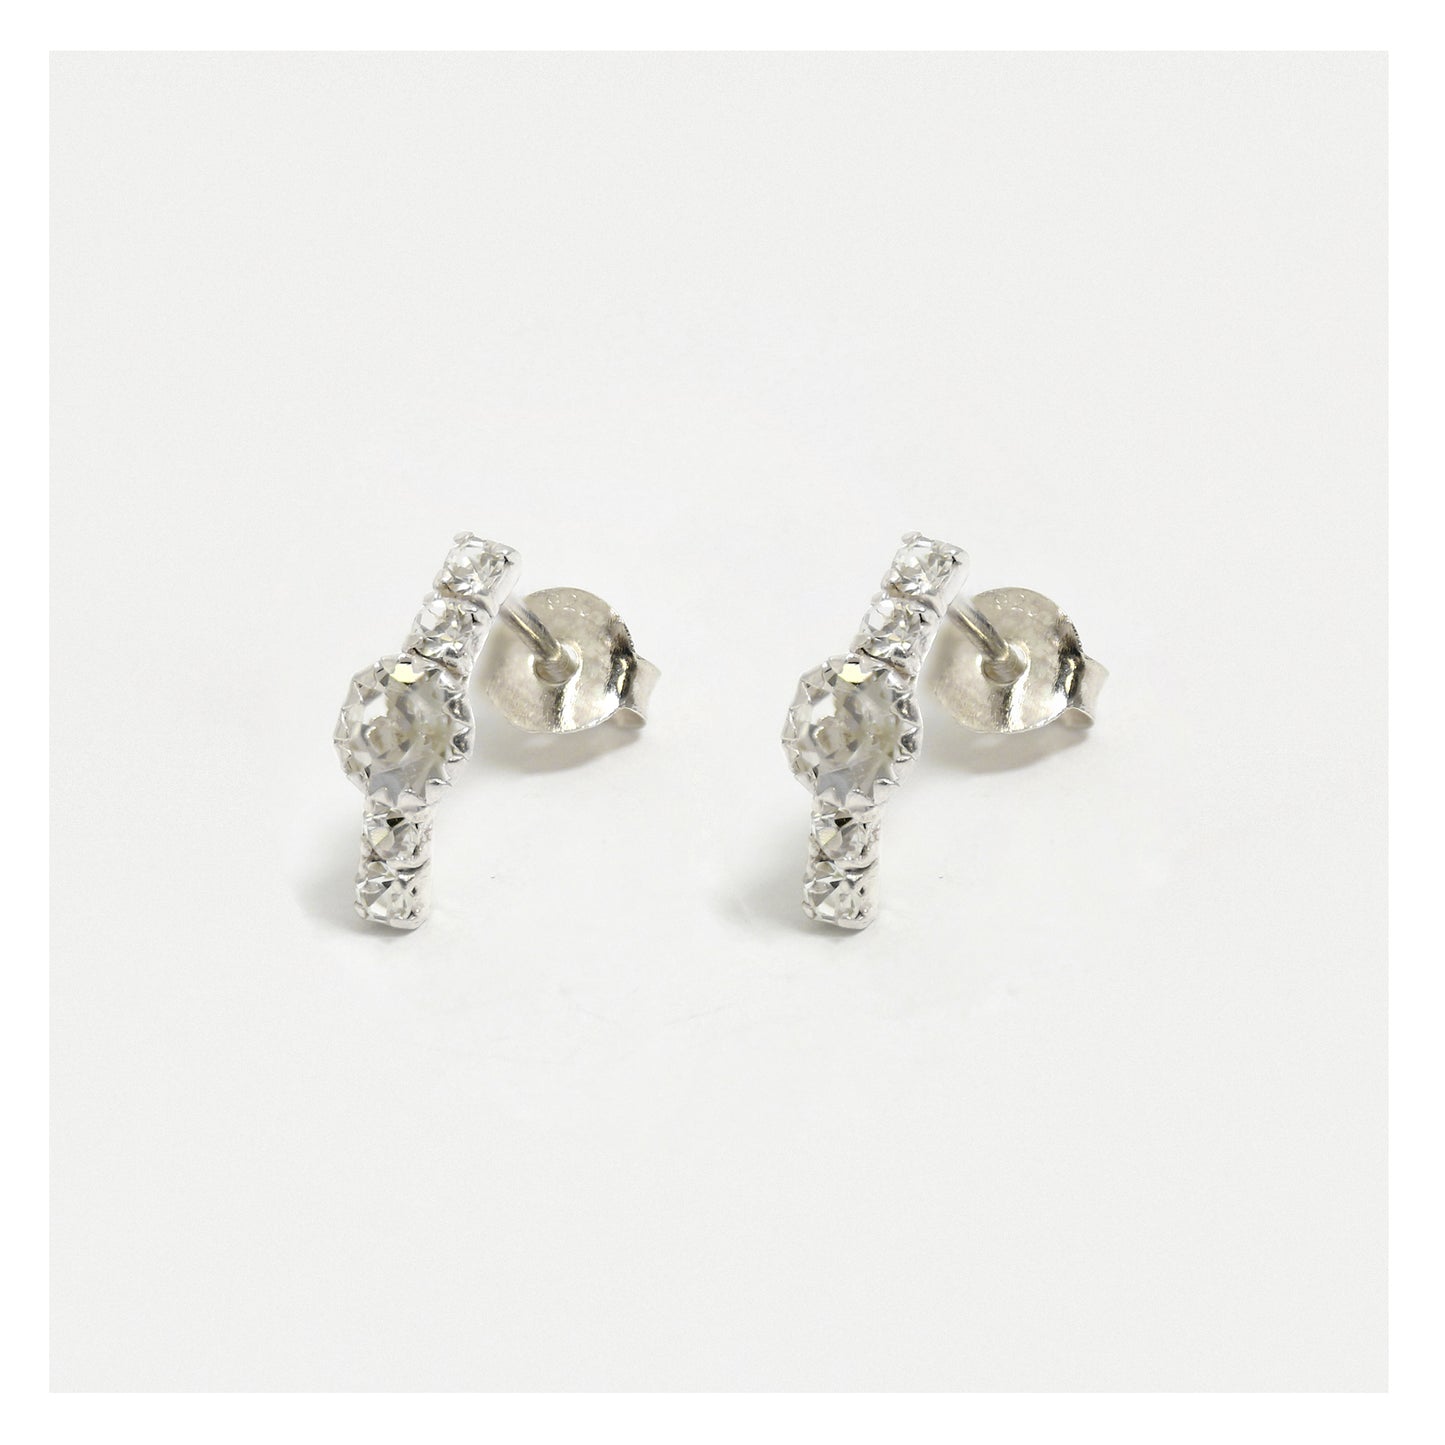 Curved Crystal Silver Ear Stud Earrings Crumble and Core   